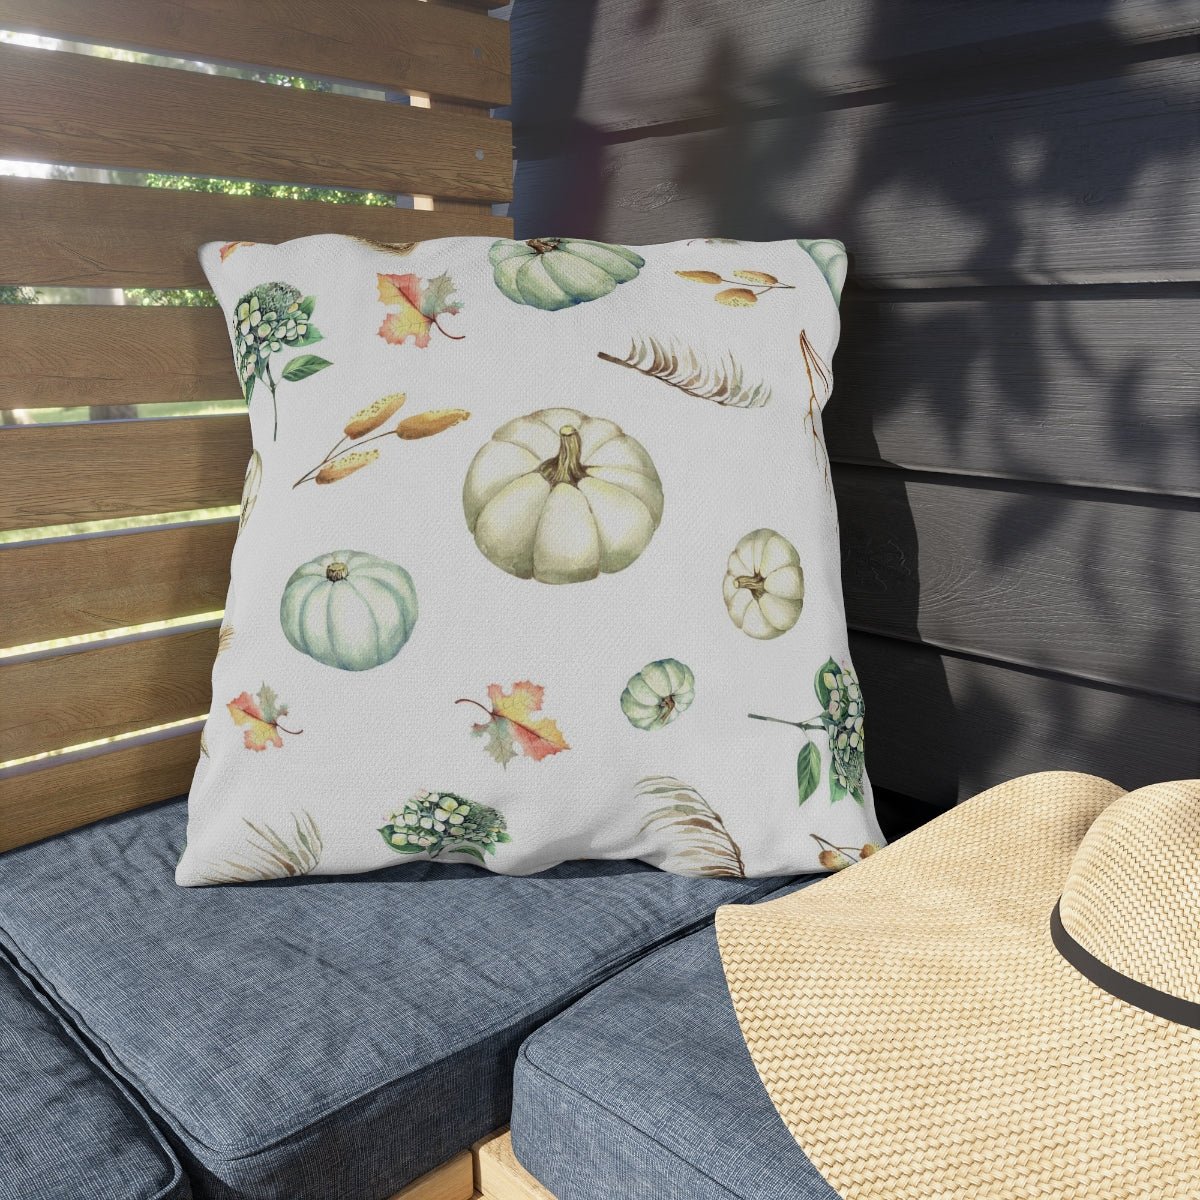 Fall Pumpkins and Leaves Outdoor Pillows - Puffin Lime